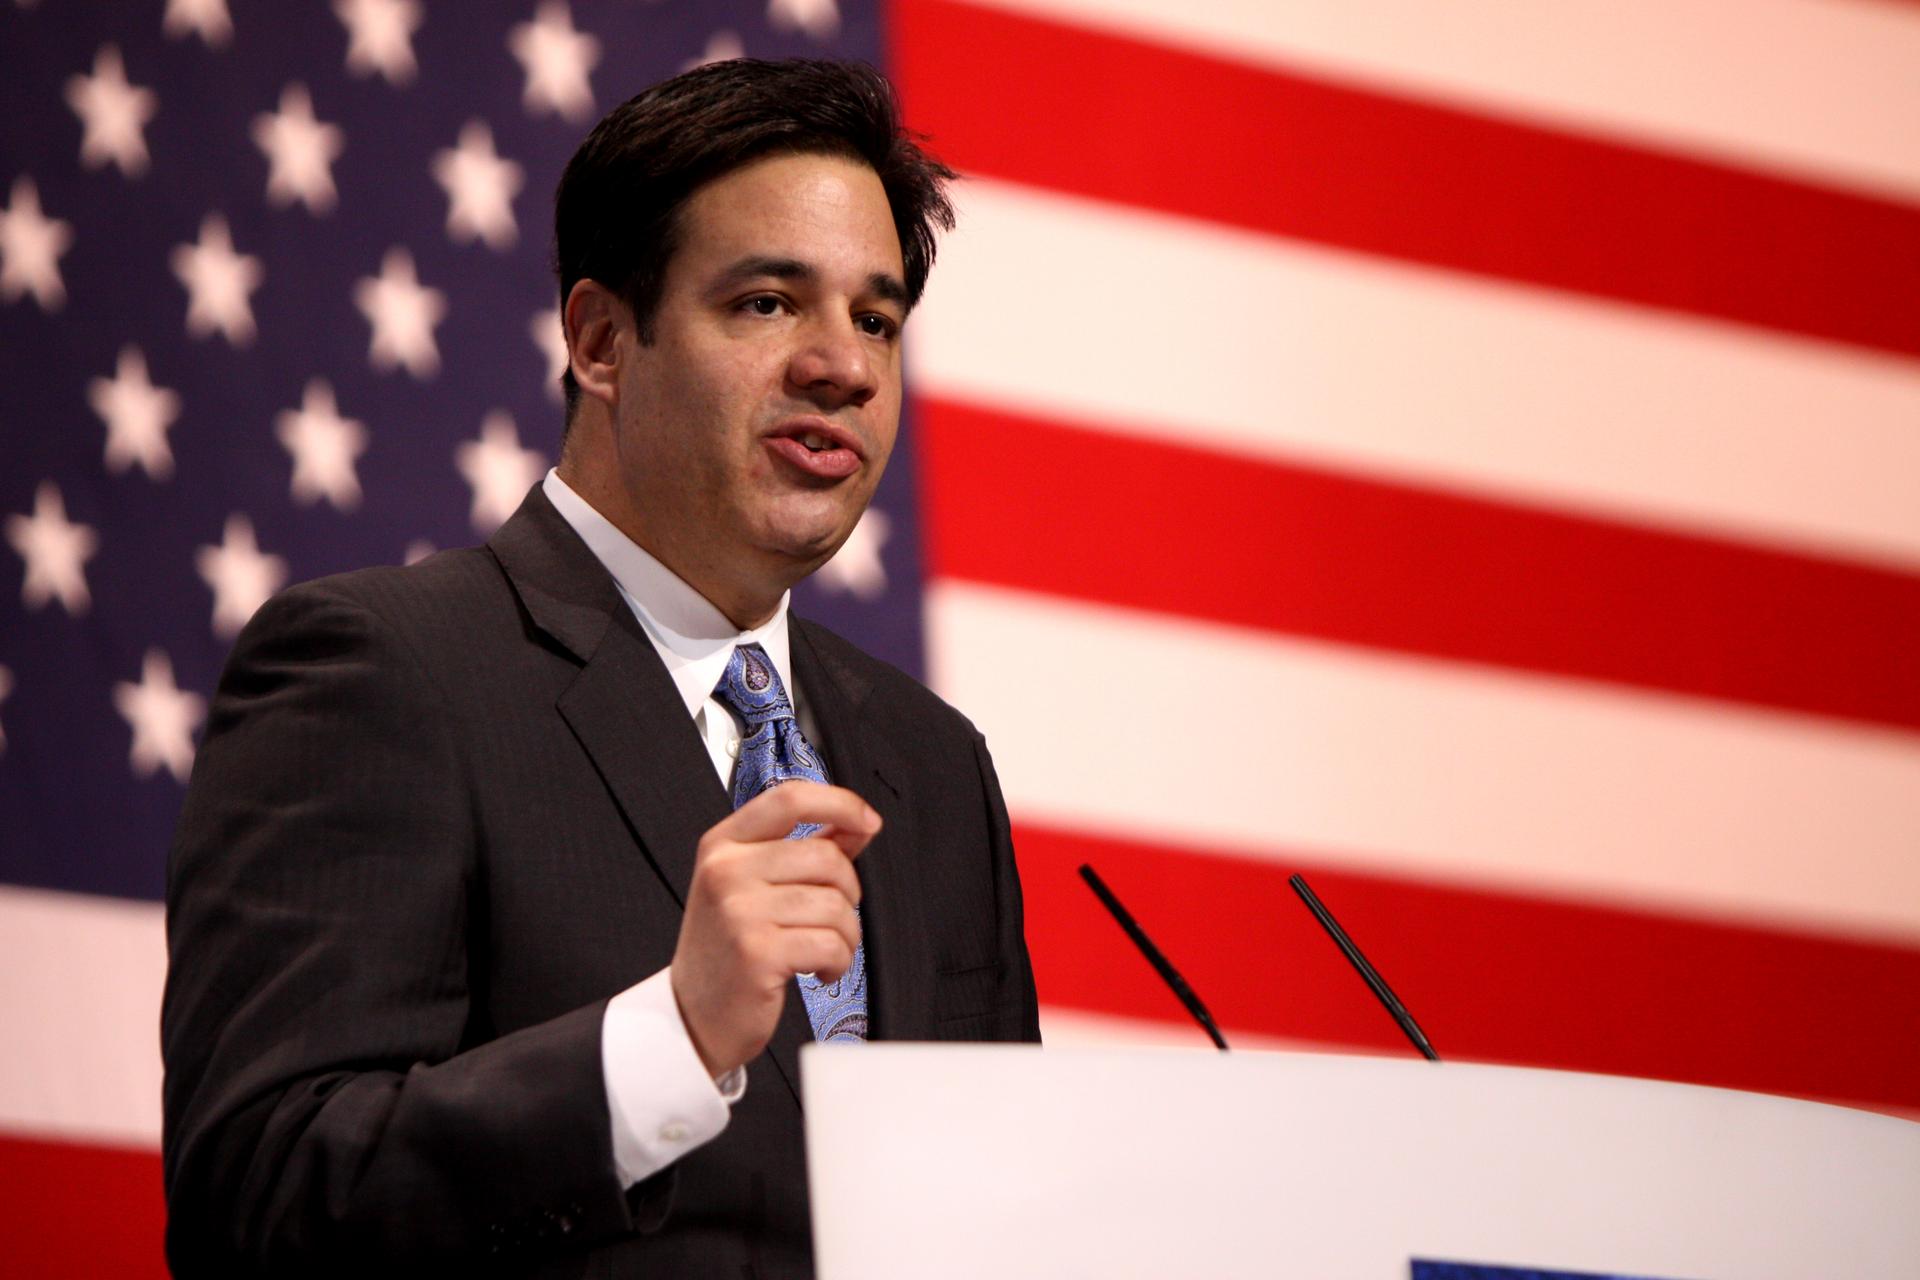 Congressman Raul Labrador of Idaho speaks at the 2013 Conservative Political Action Conference (CPAC) in National Harbor, Maryland.